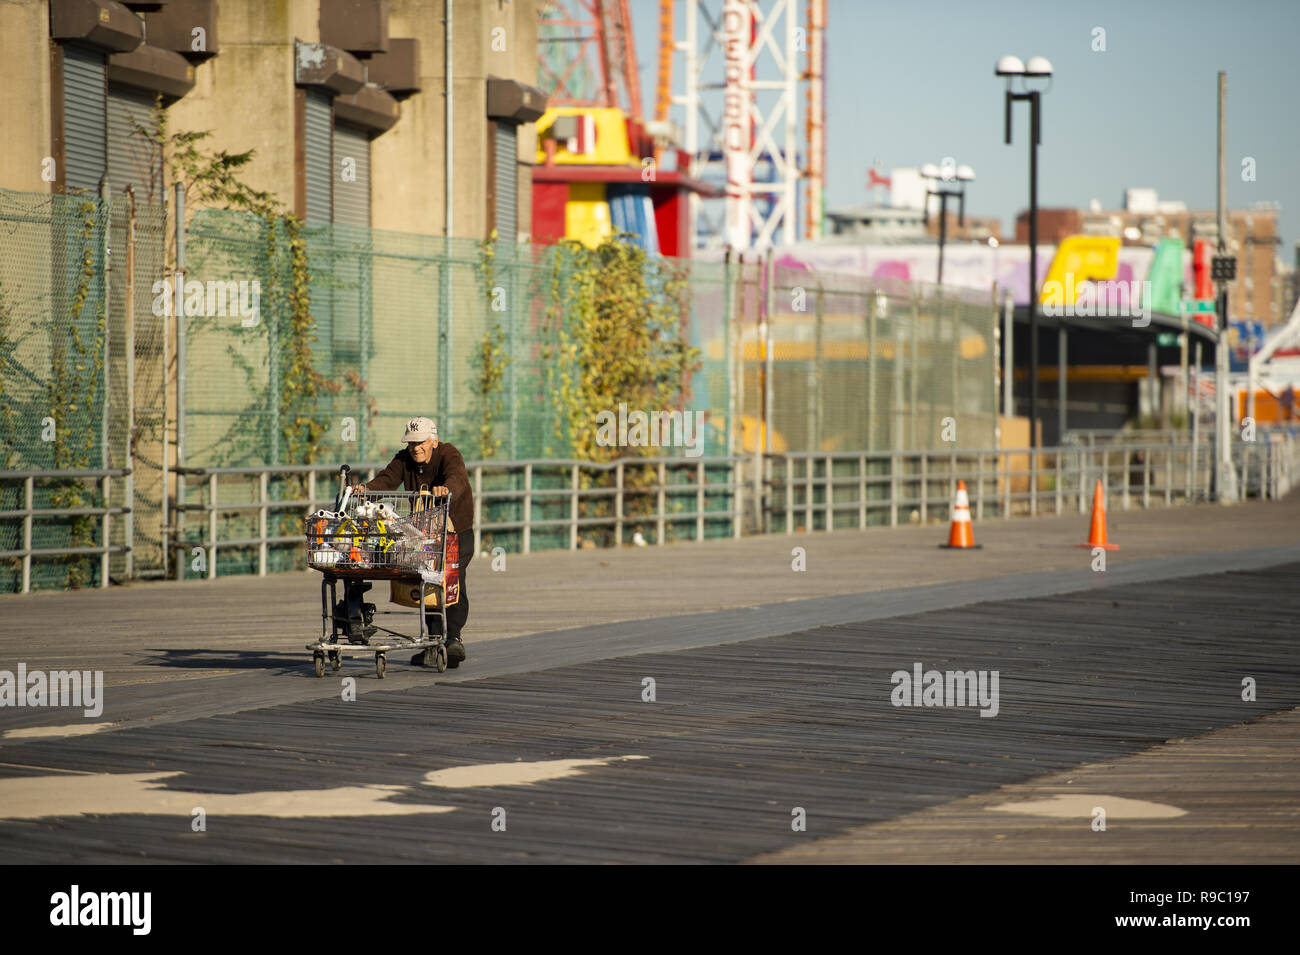 A homeless man is pushing a shopping cart full of stuff collected on Coney Island beach. Stock Photo